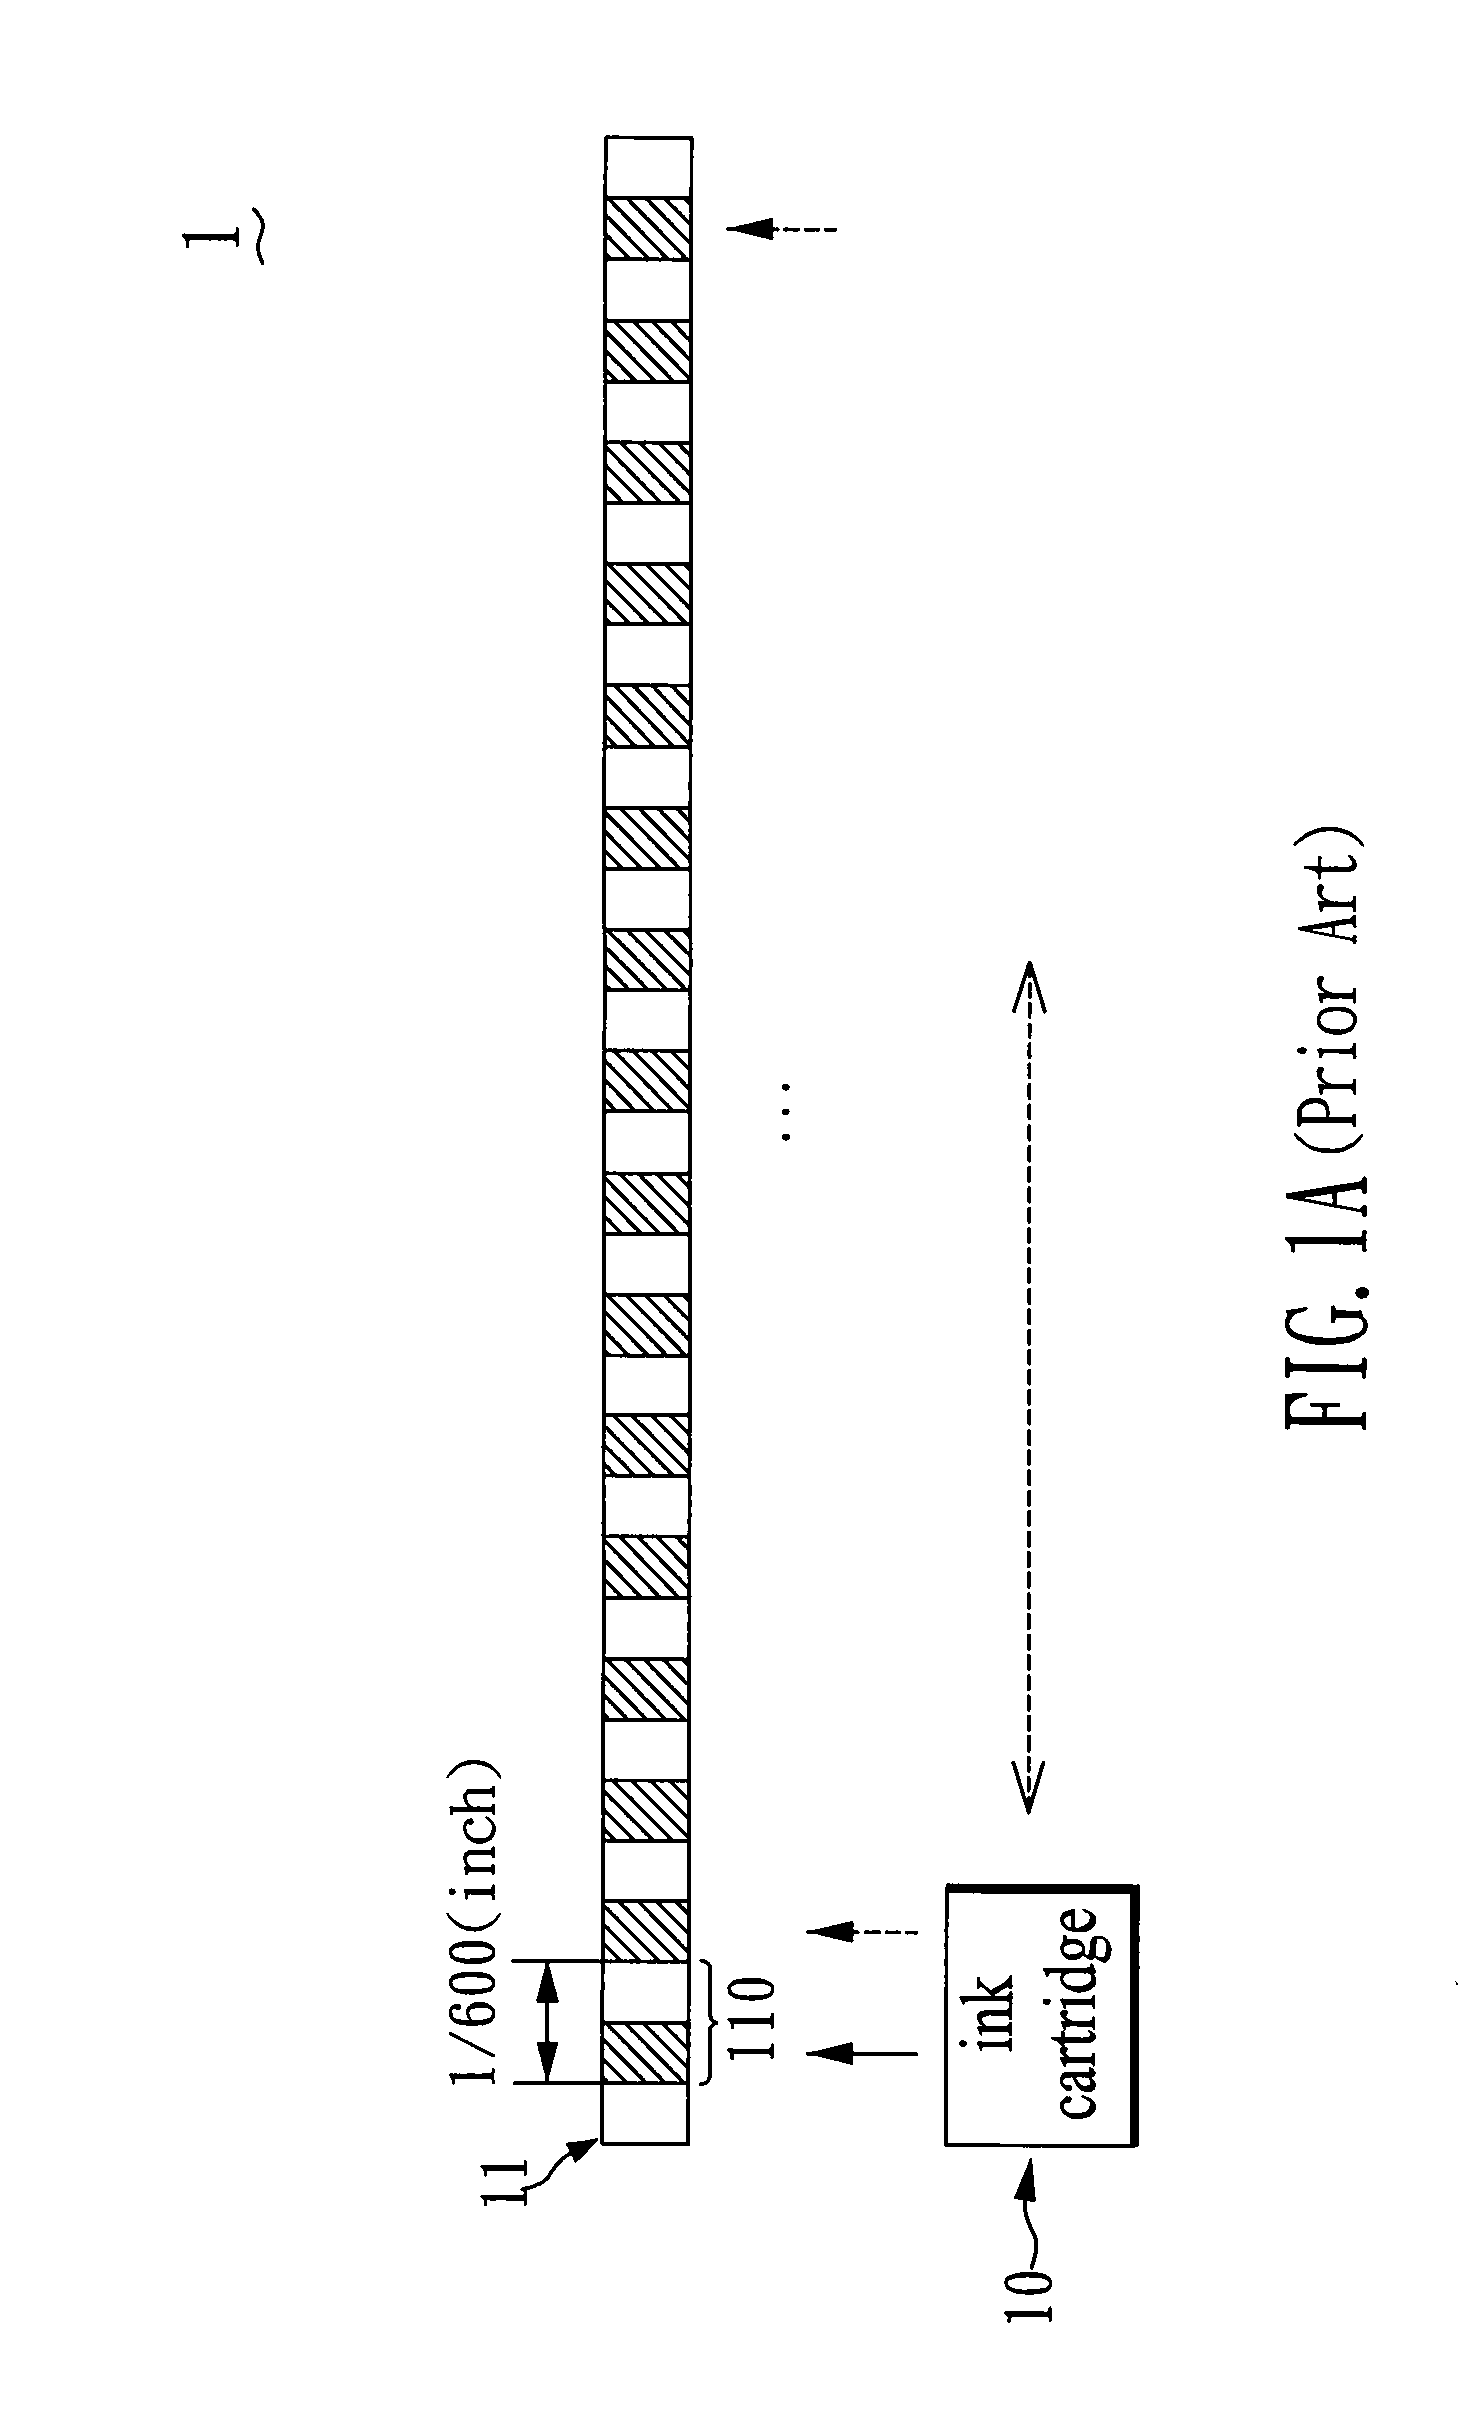 High-speed page wide multiple-pass printing method and a printing device adaptive to the high-speed page wide multiple-pass printing method